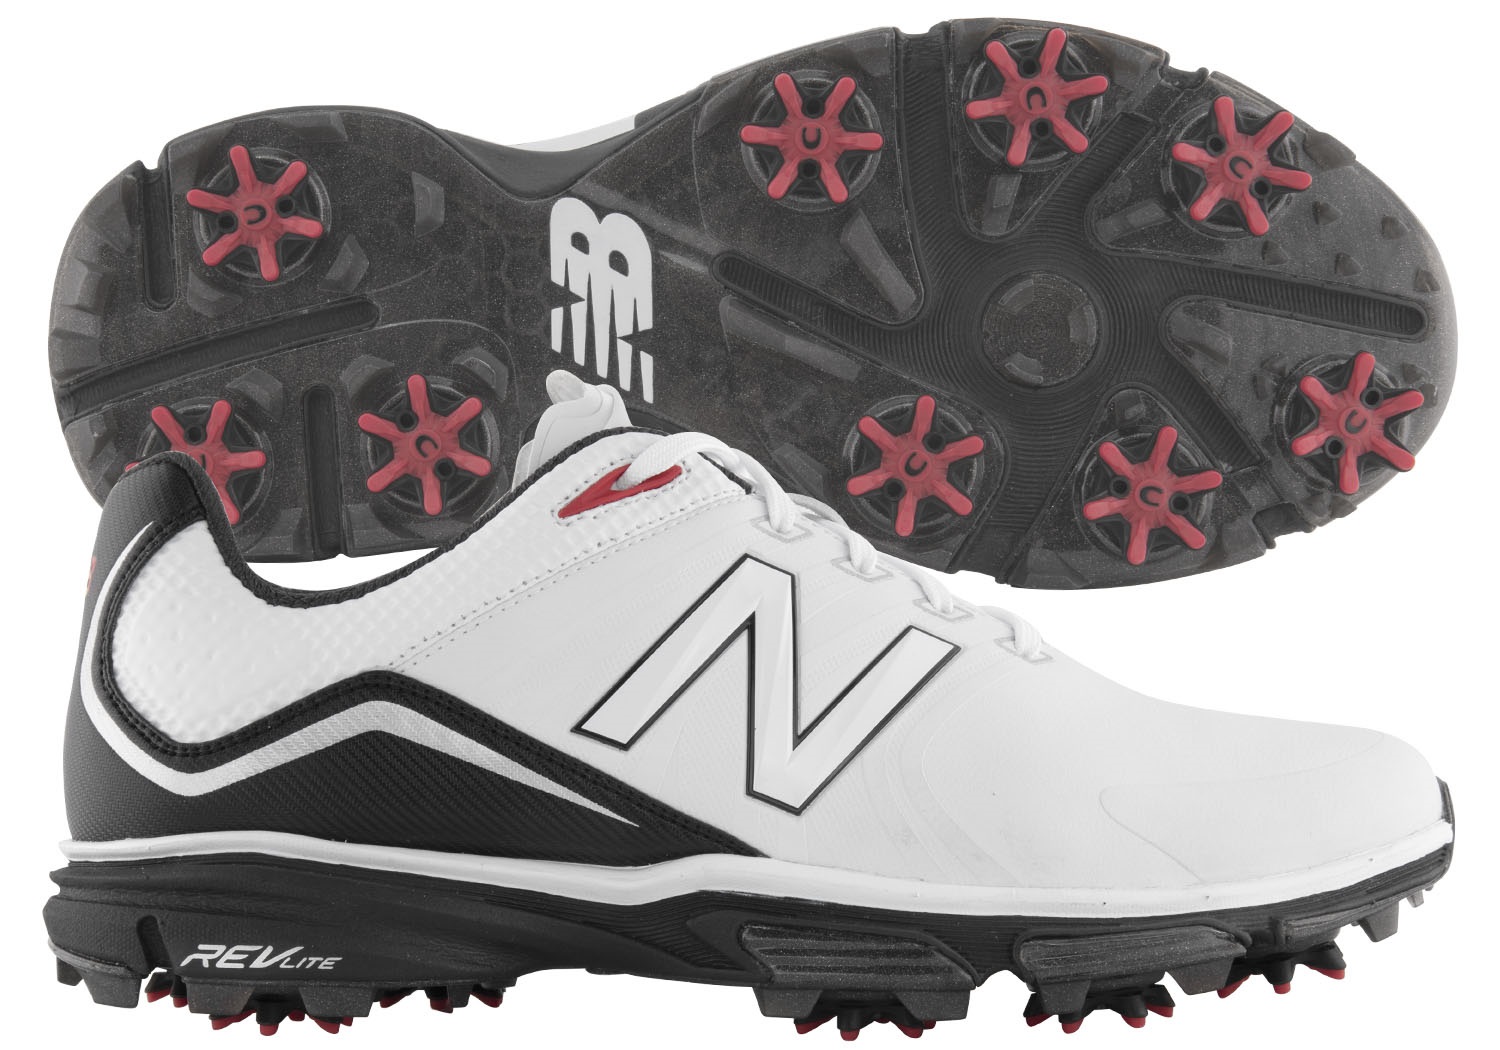 New Balance Golf Introduces NB Tour - The Golf Wire